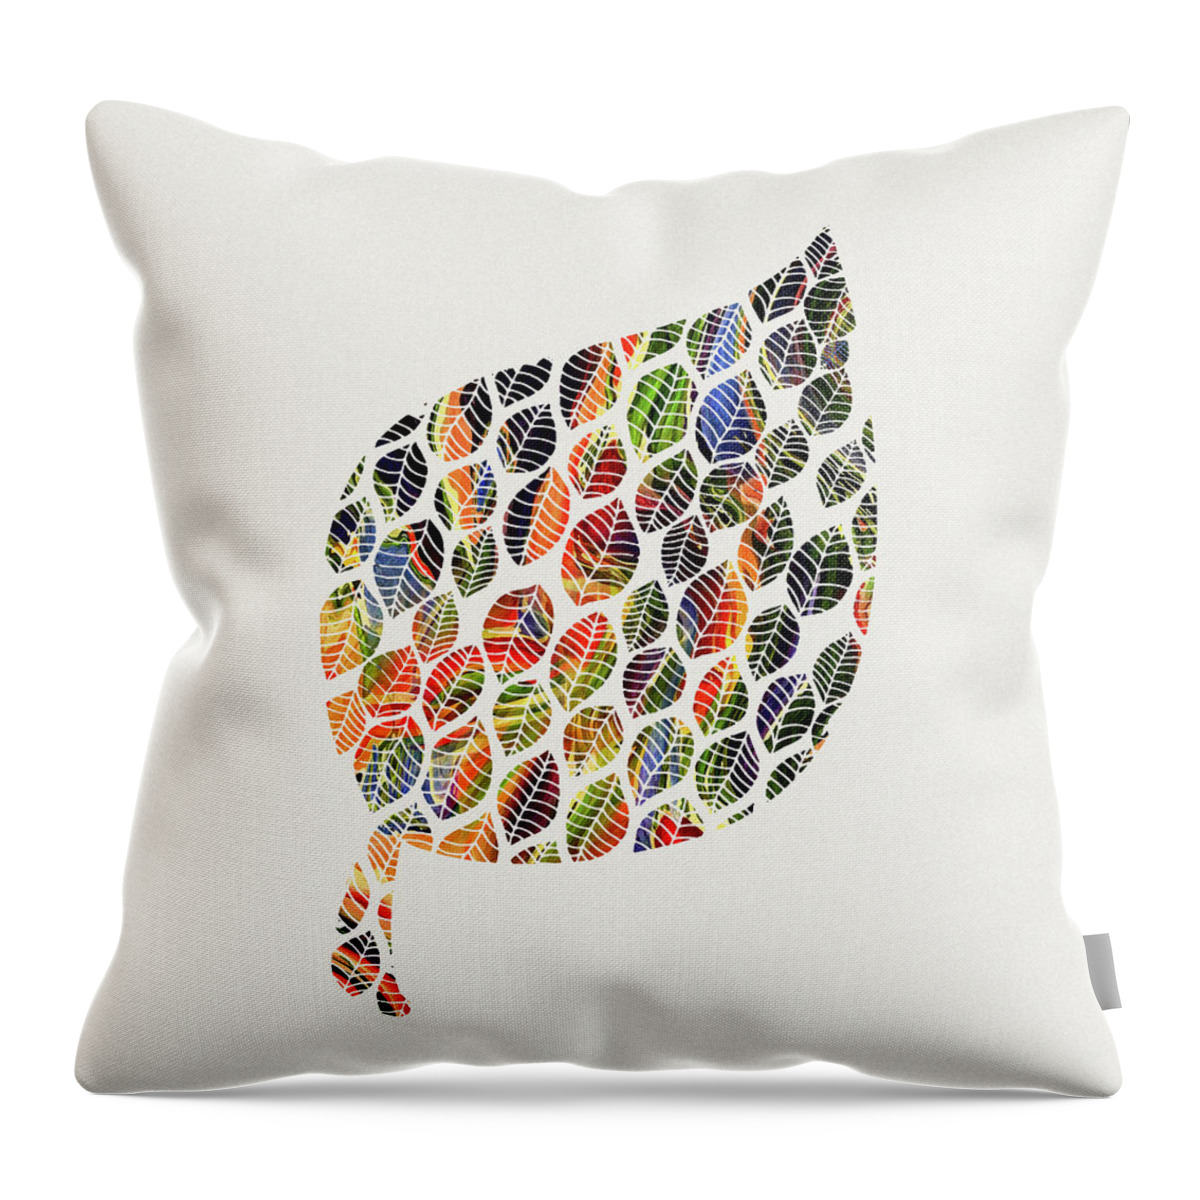 Leaves Throw Pillow featuring the digital art Leafy Palette by Deborah Smith